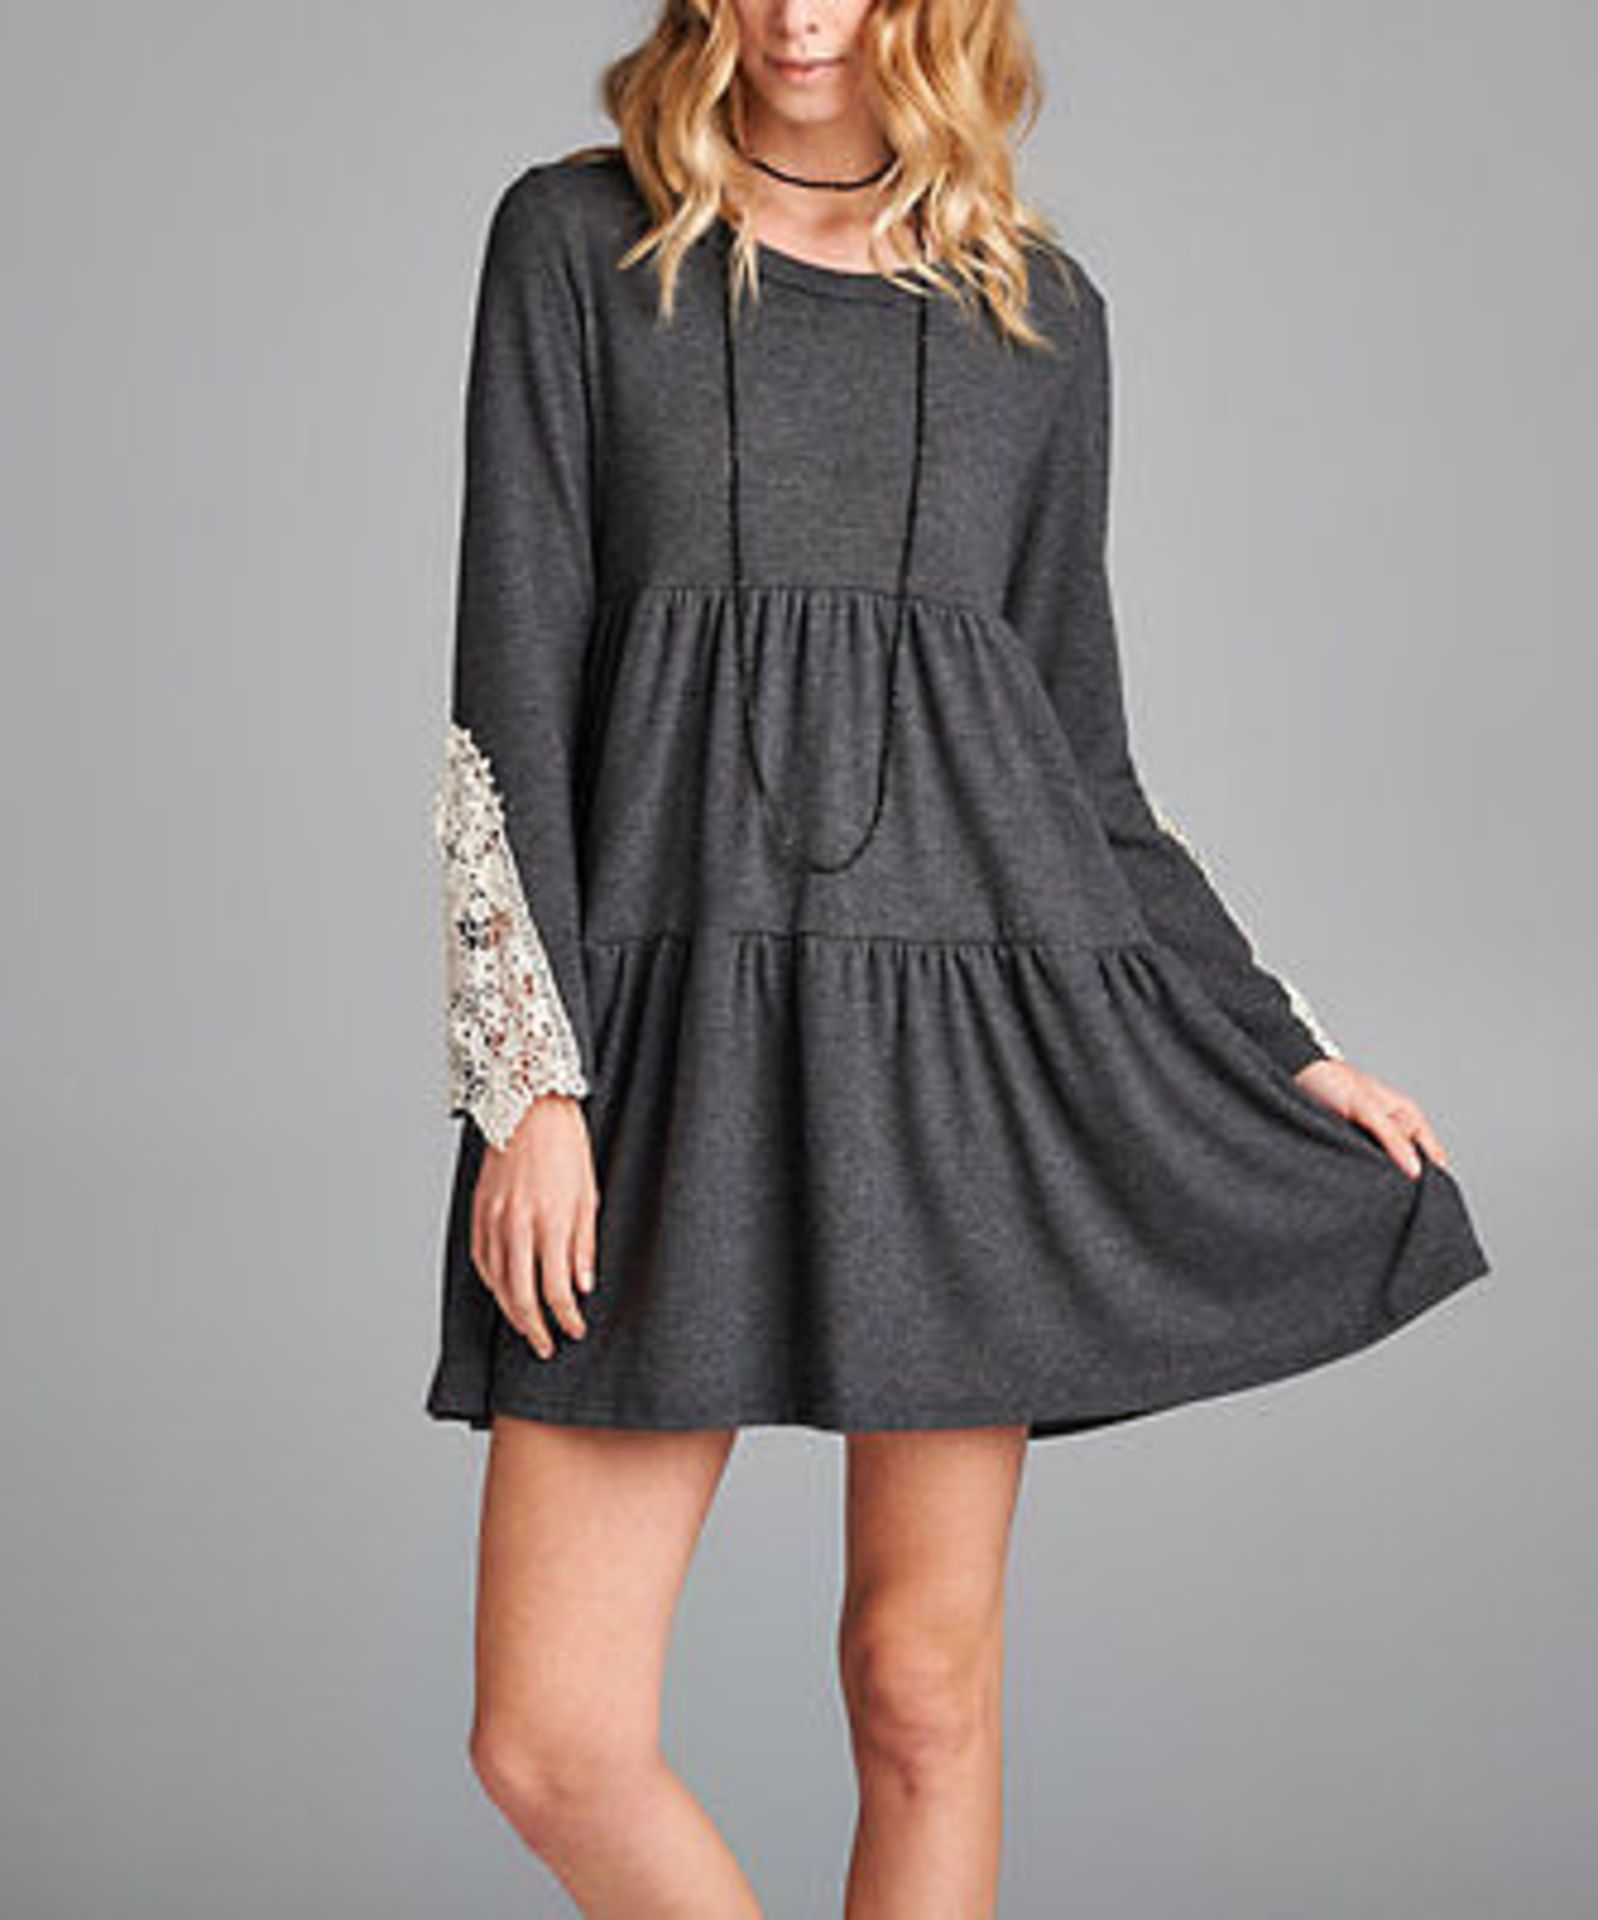 Charcoal Crochet-Sleeve Swing Dress (US S/UK 8/EU 36) (New with tags) [Ref: 44823101- T-4] - Image 2 of 3